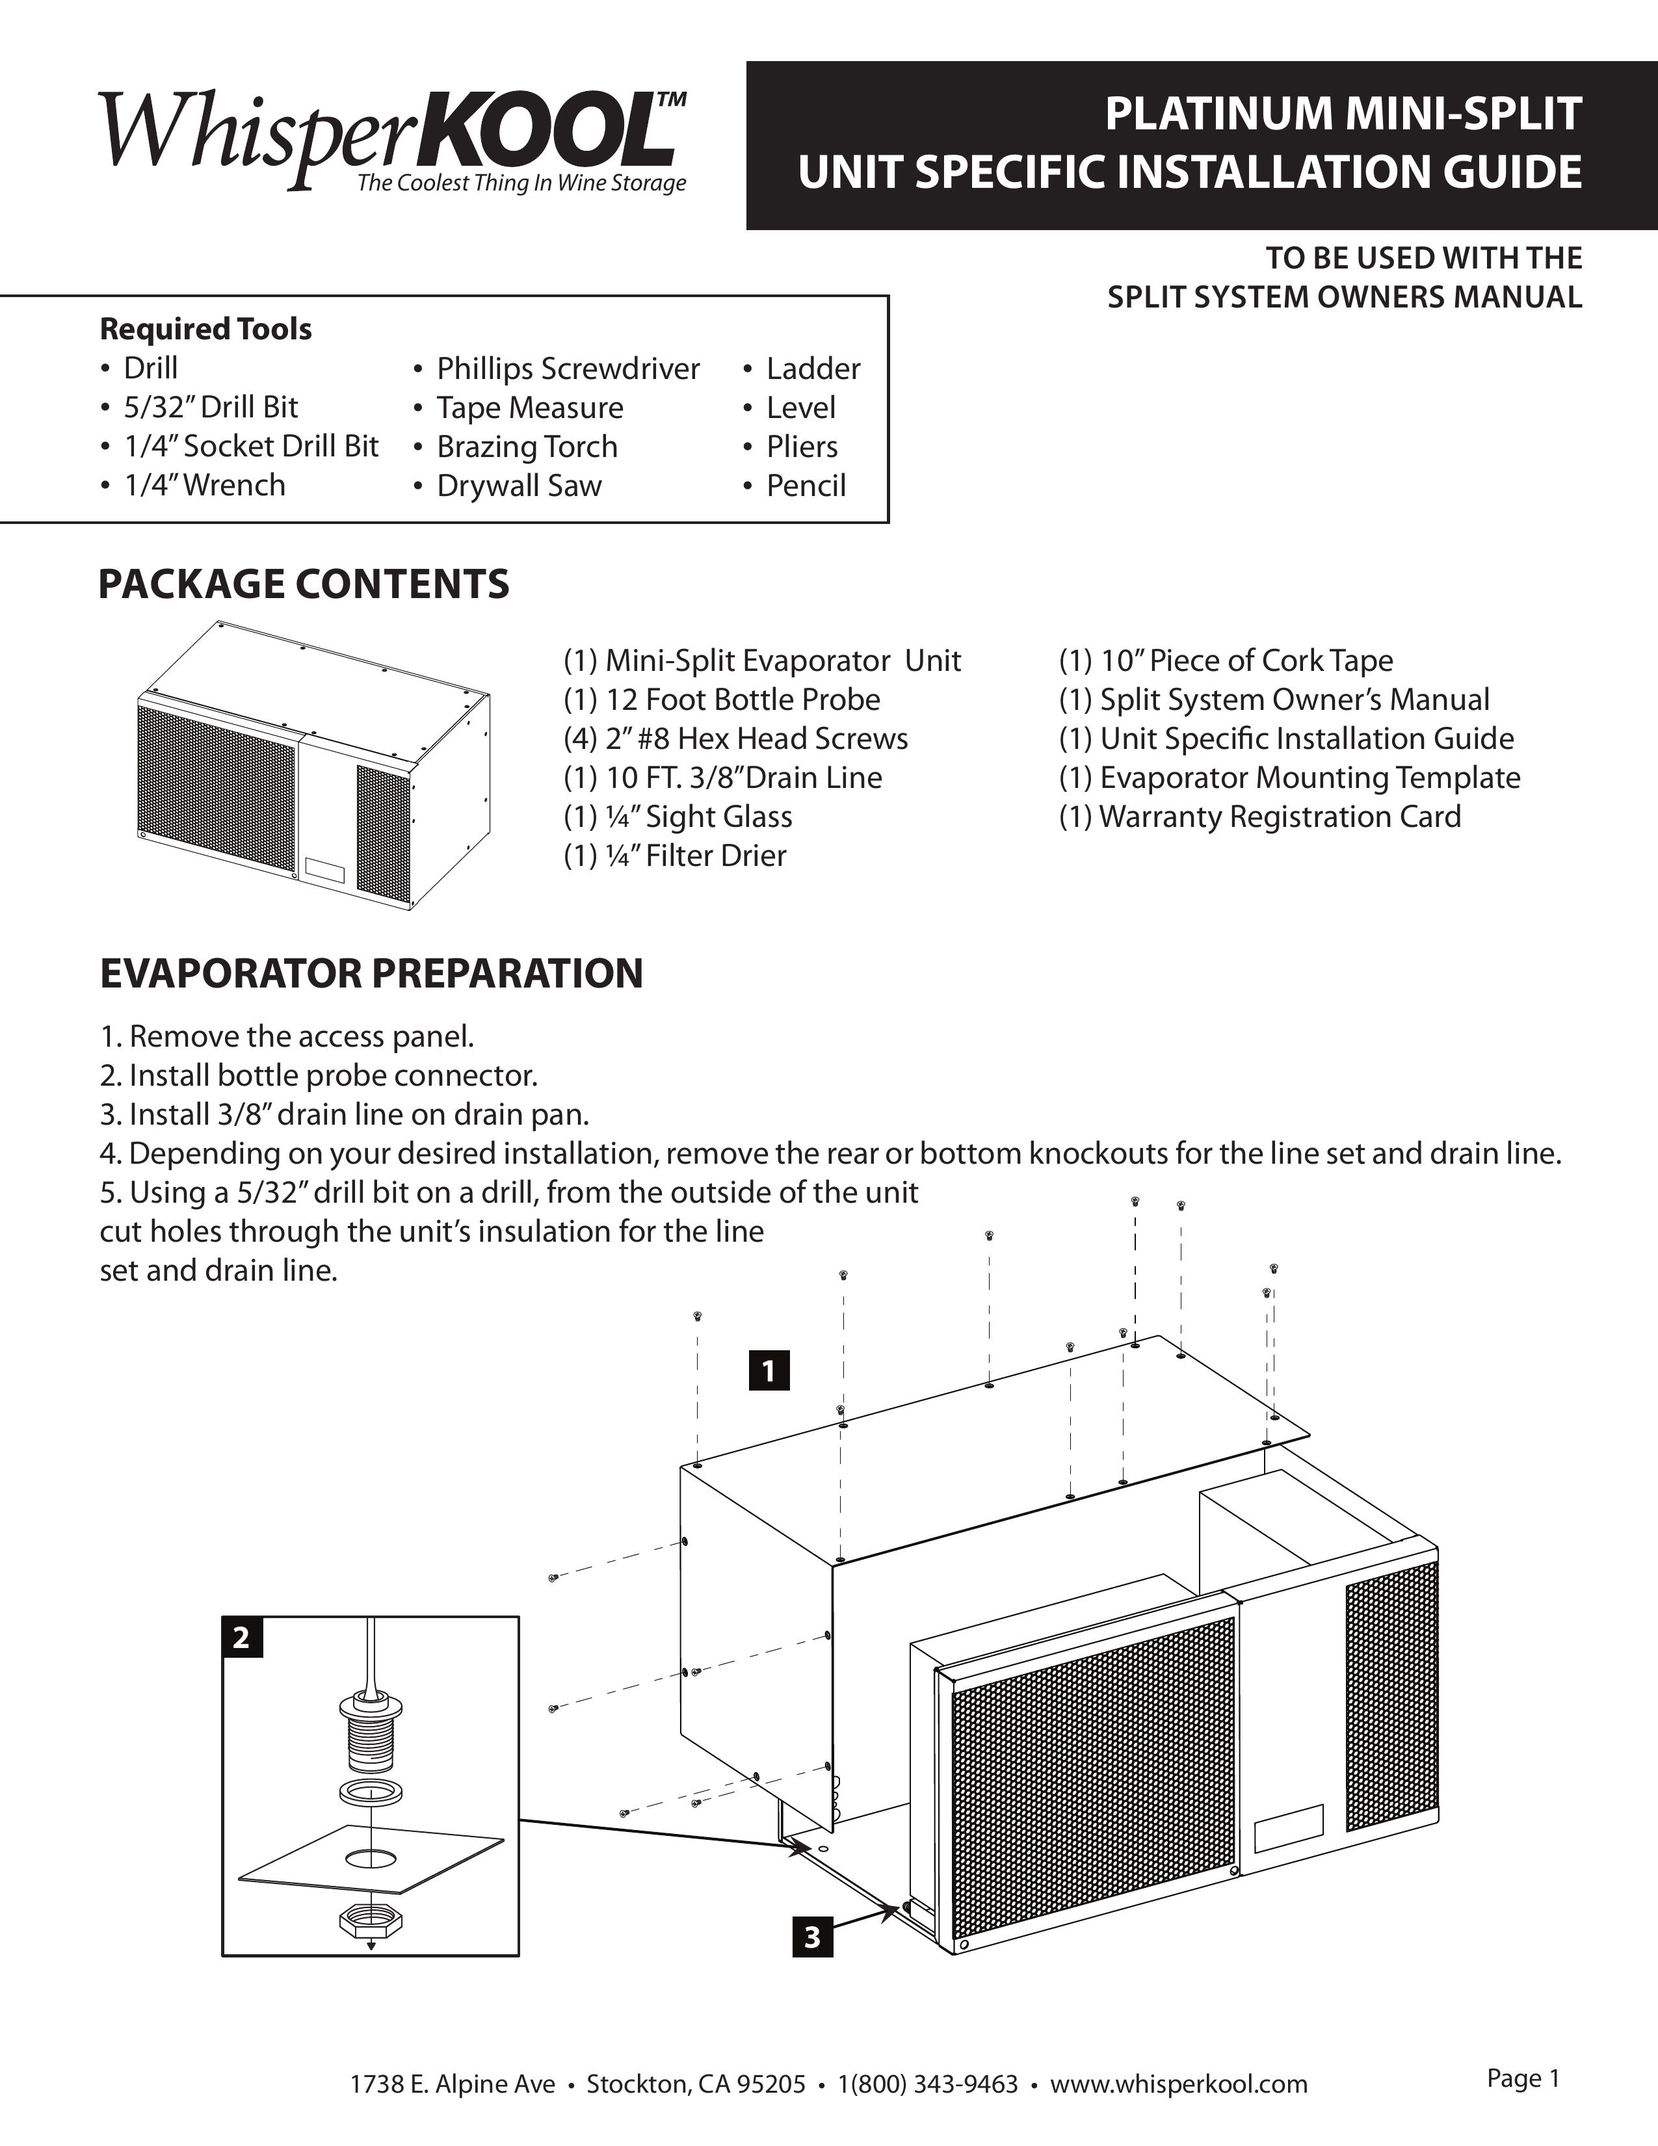 WhisperKool 2PMS-01 Air Conditioner User Manual